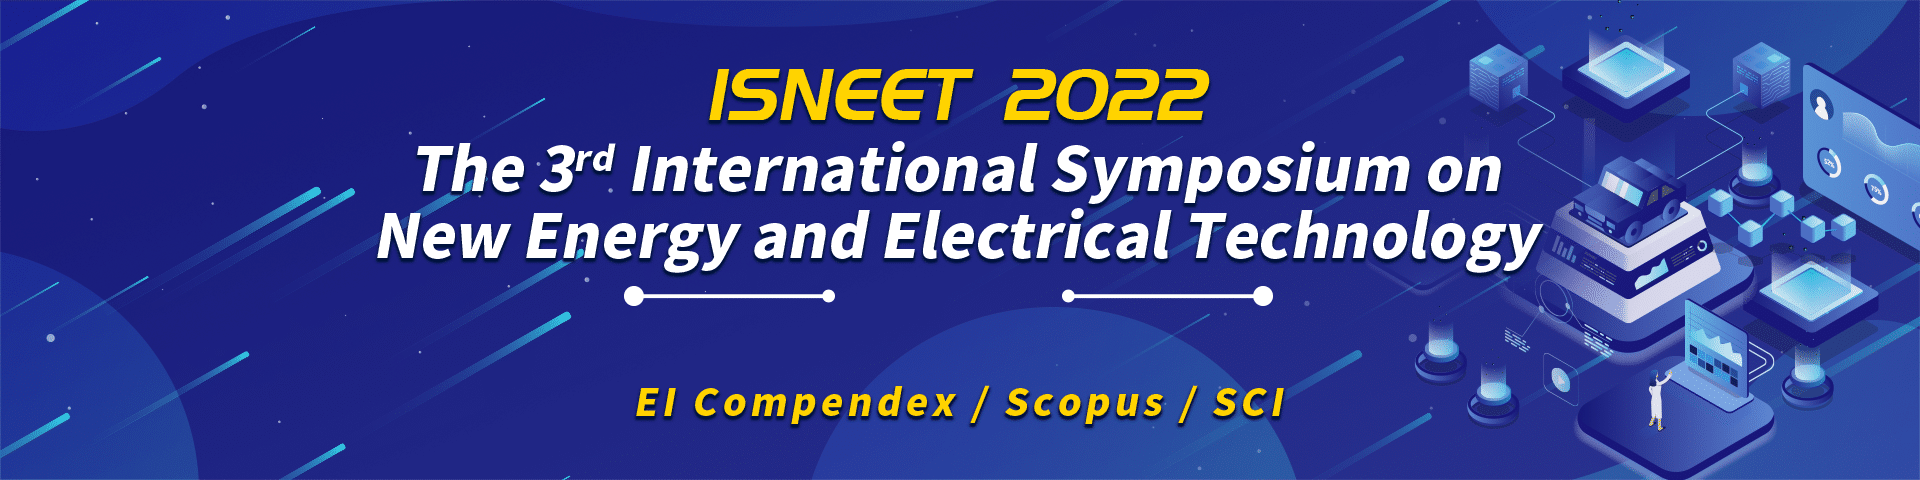 The 3rd International Symposium on New Energy and Electrical Technology（ISNEET 2022）